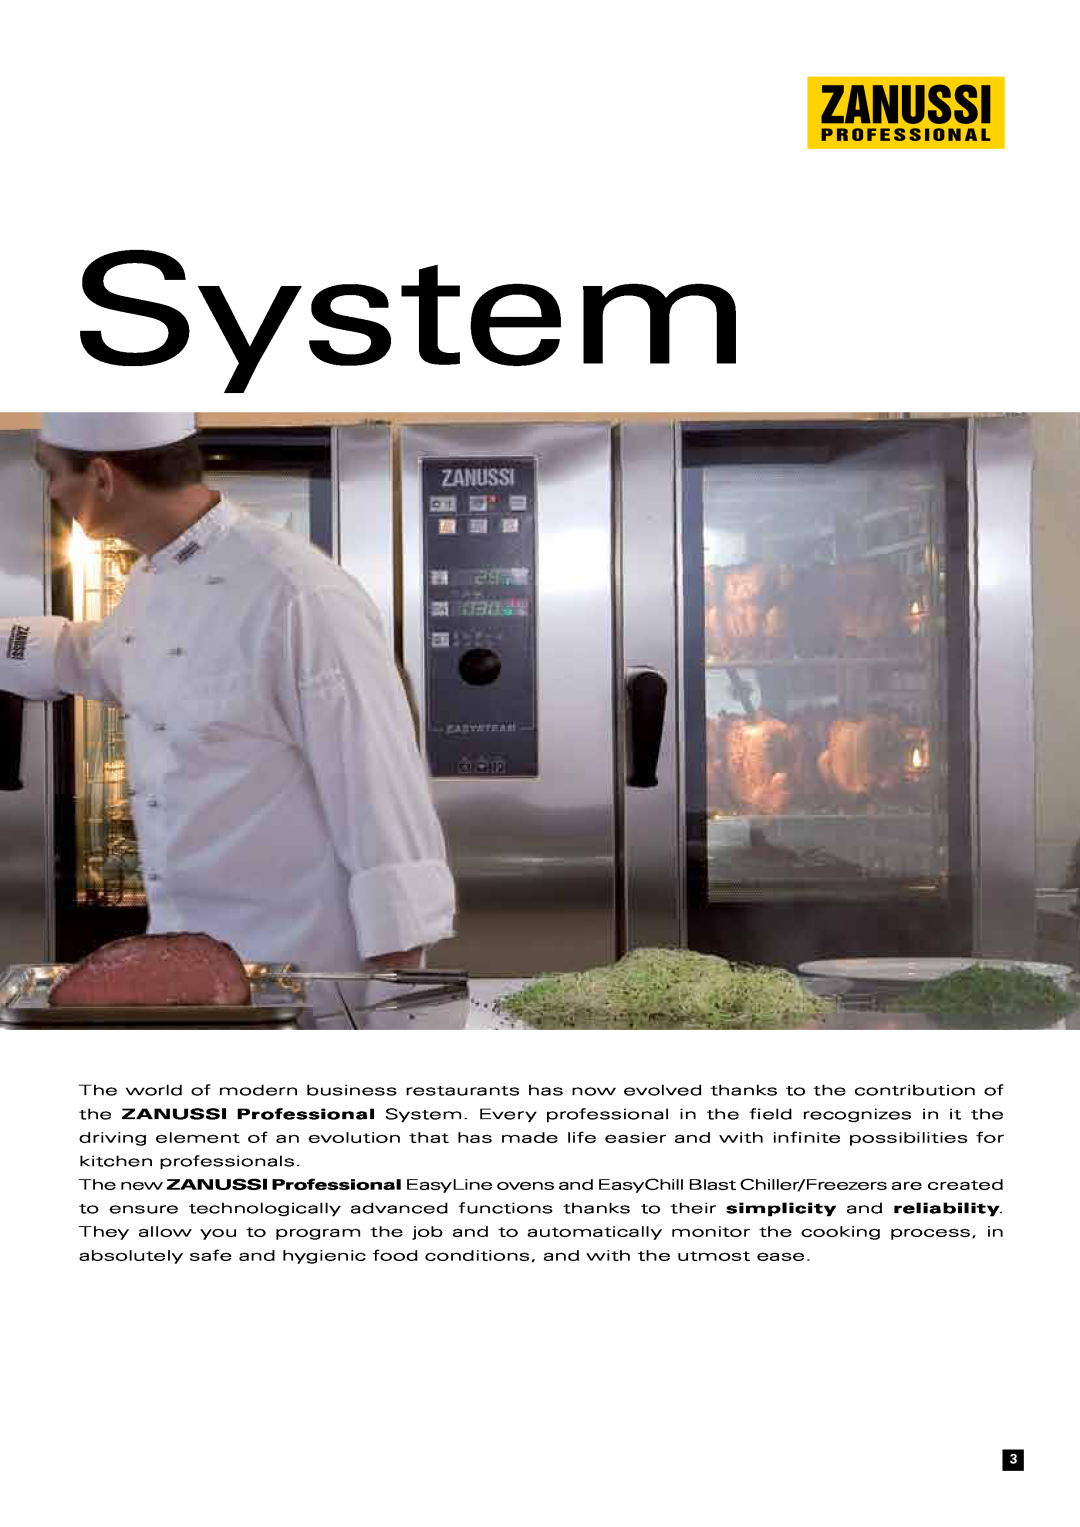 Zanussi Convection Oven manual System 